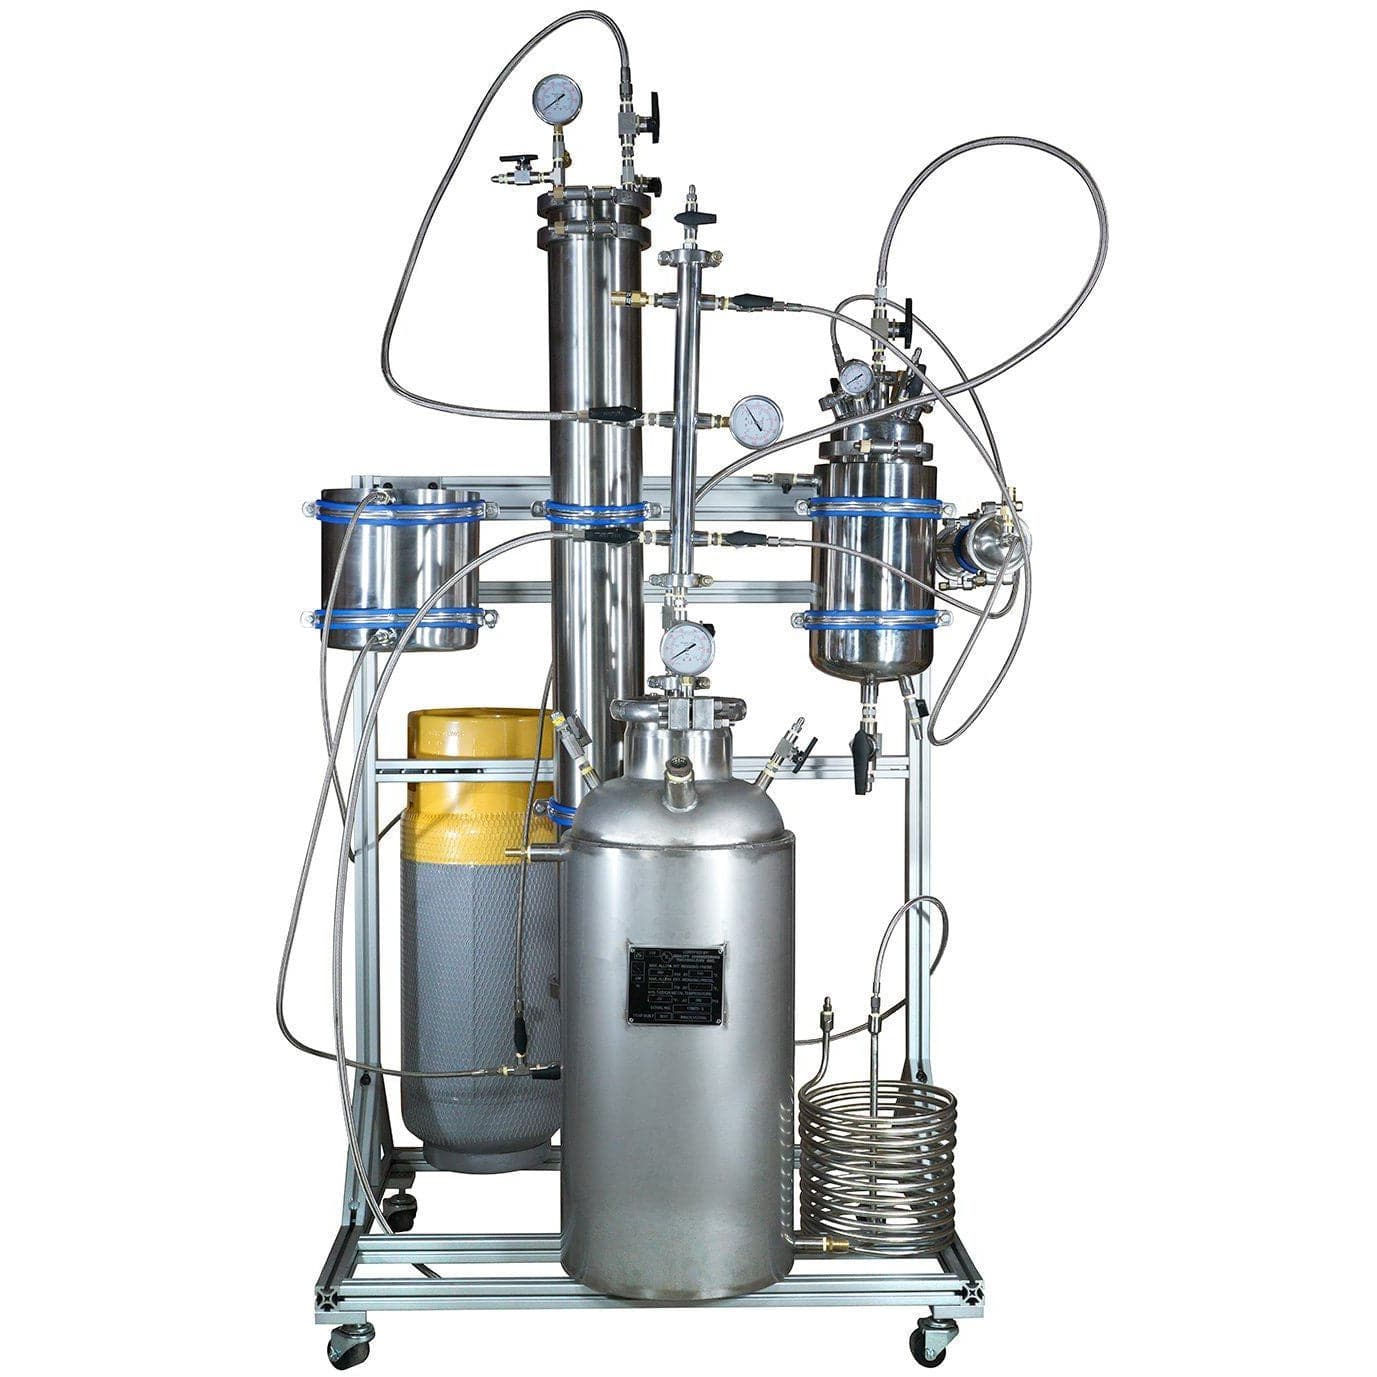 BVV 10LB Active PSI Certified Closed Loop Extraction System